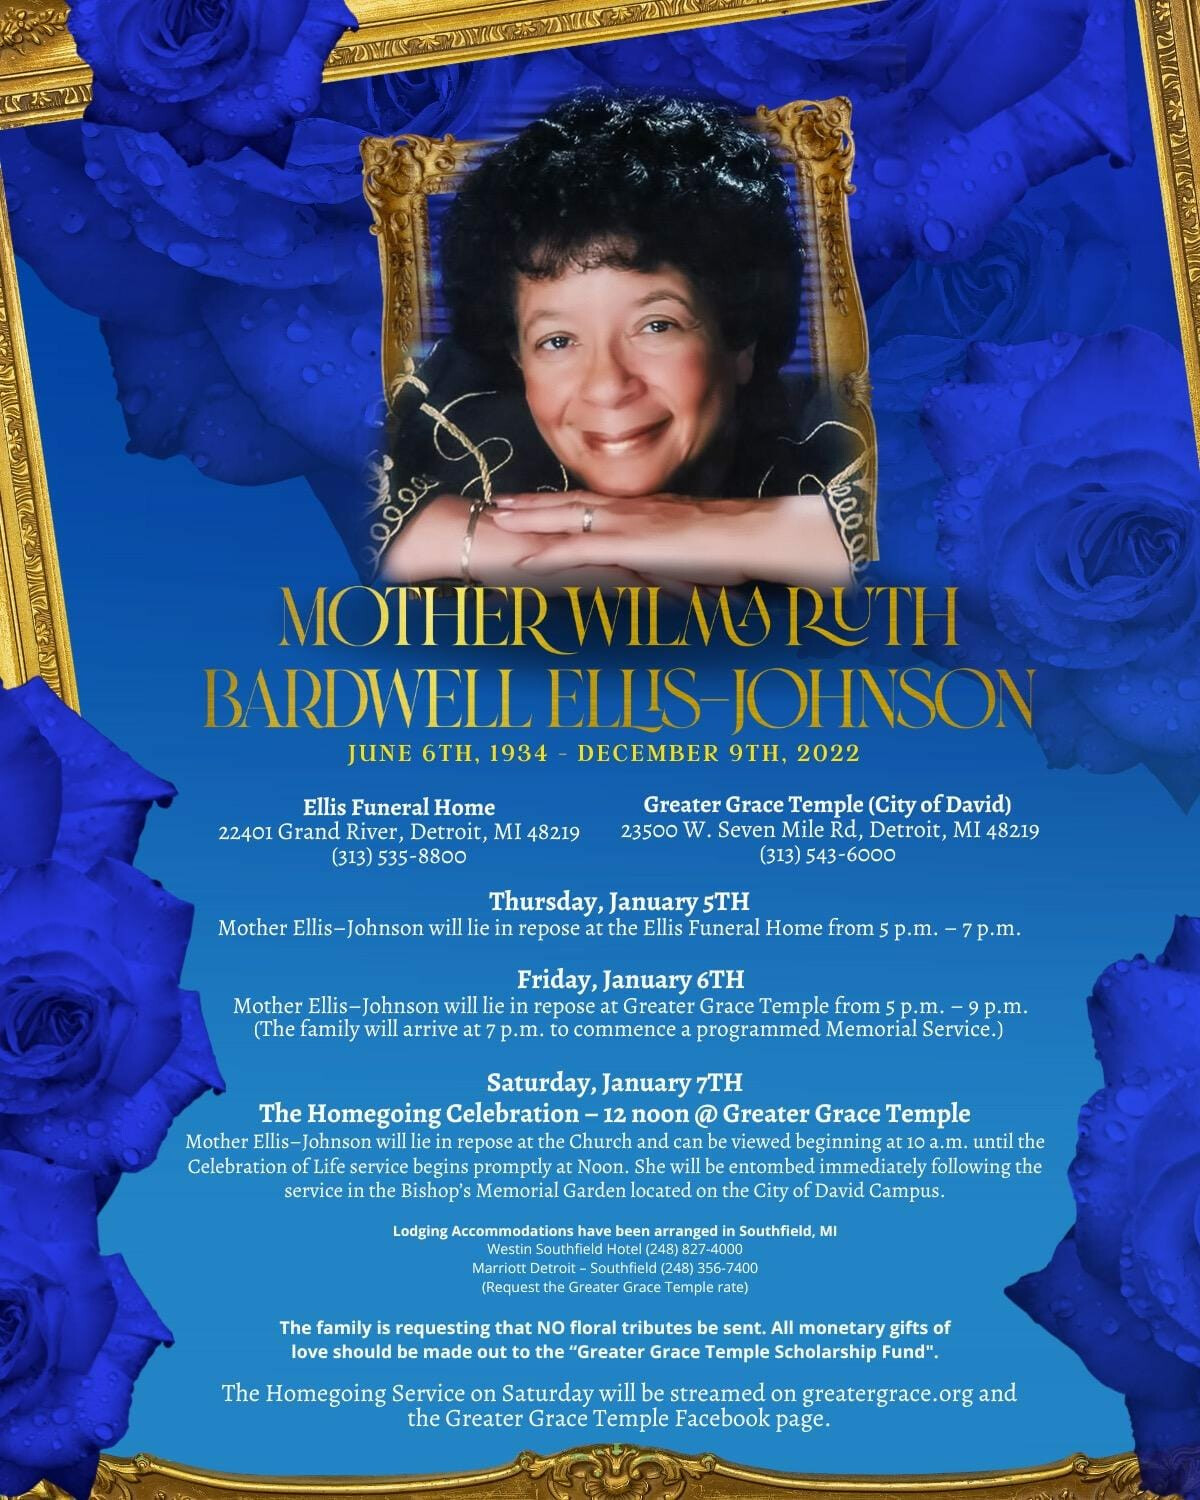 Homegoing Celebration Services For Mother Wilma Ruth Bardwell Ellis-Johnson